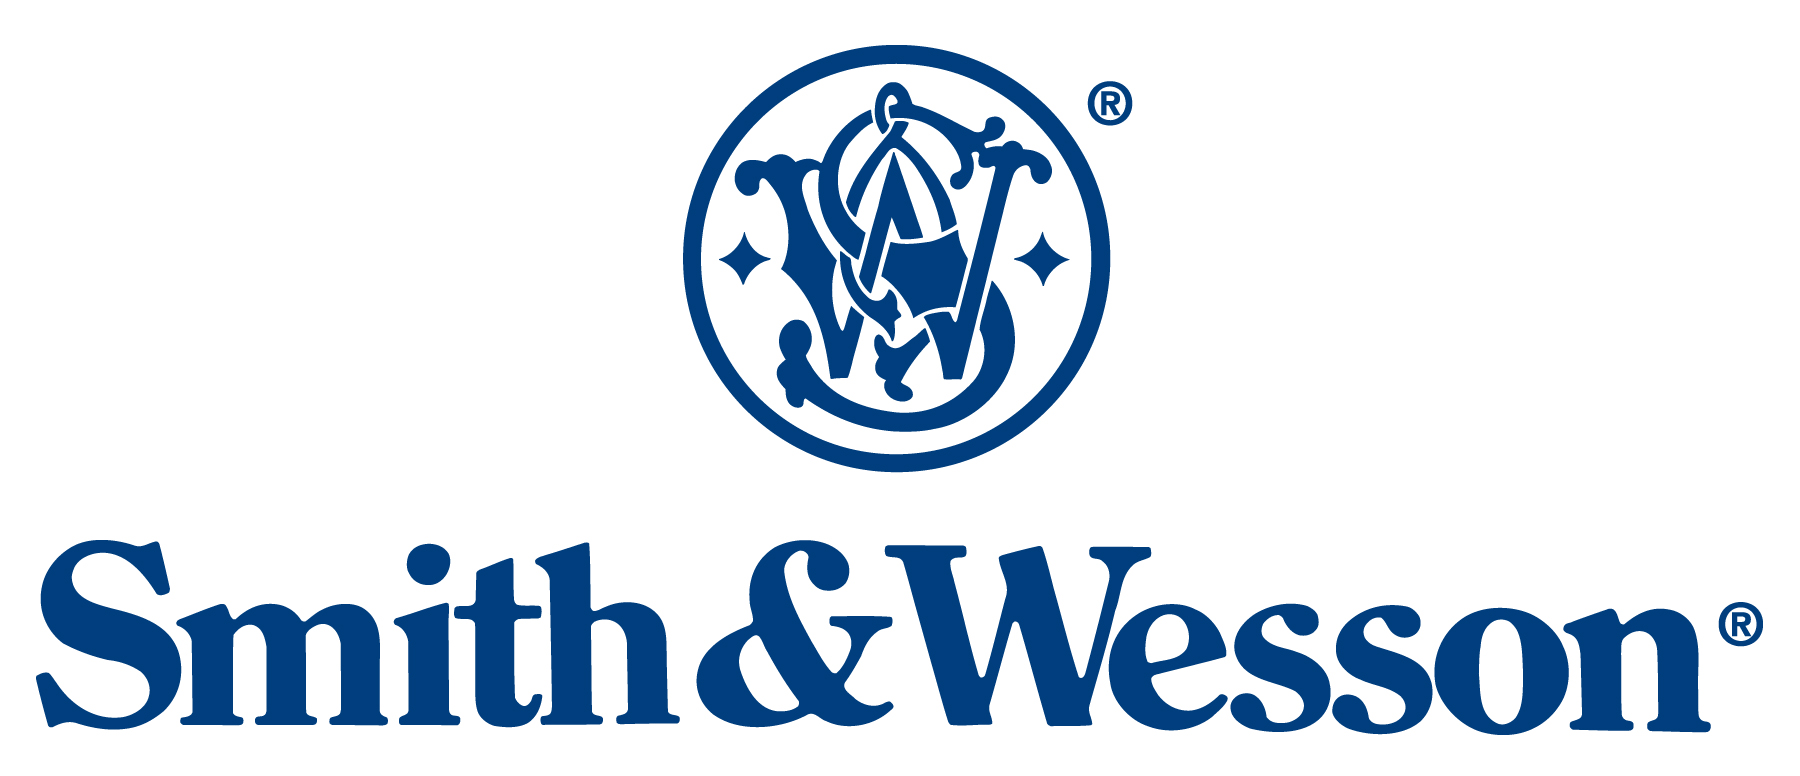 Smith And Wesson Logo Wallpaper